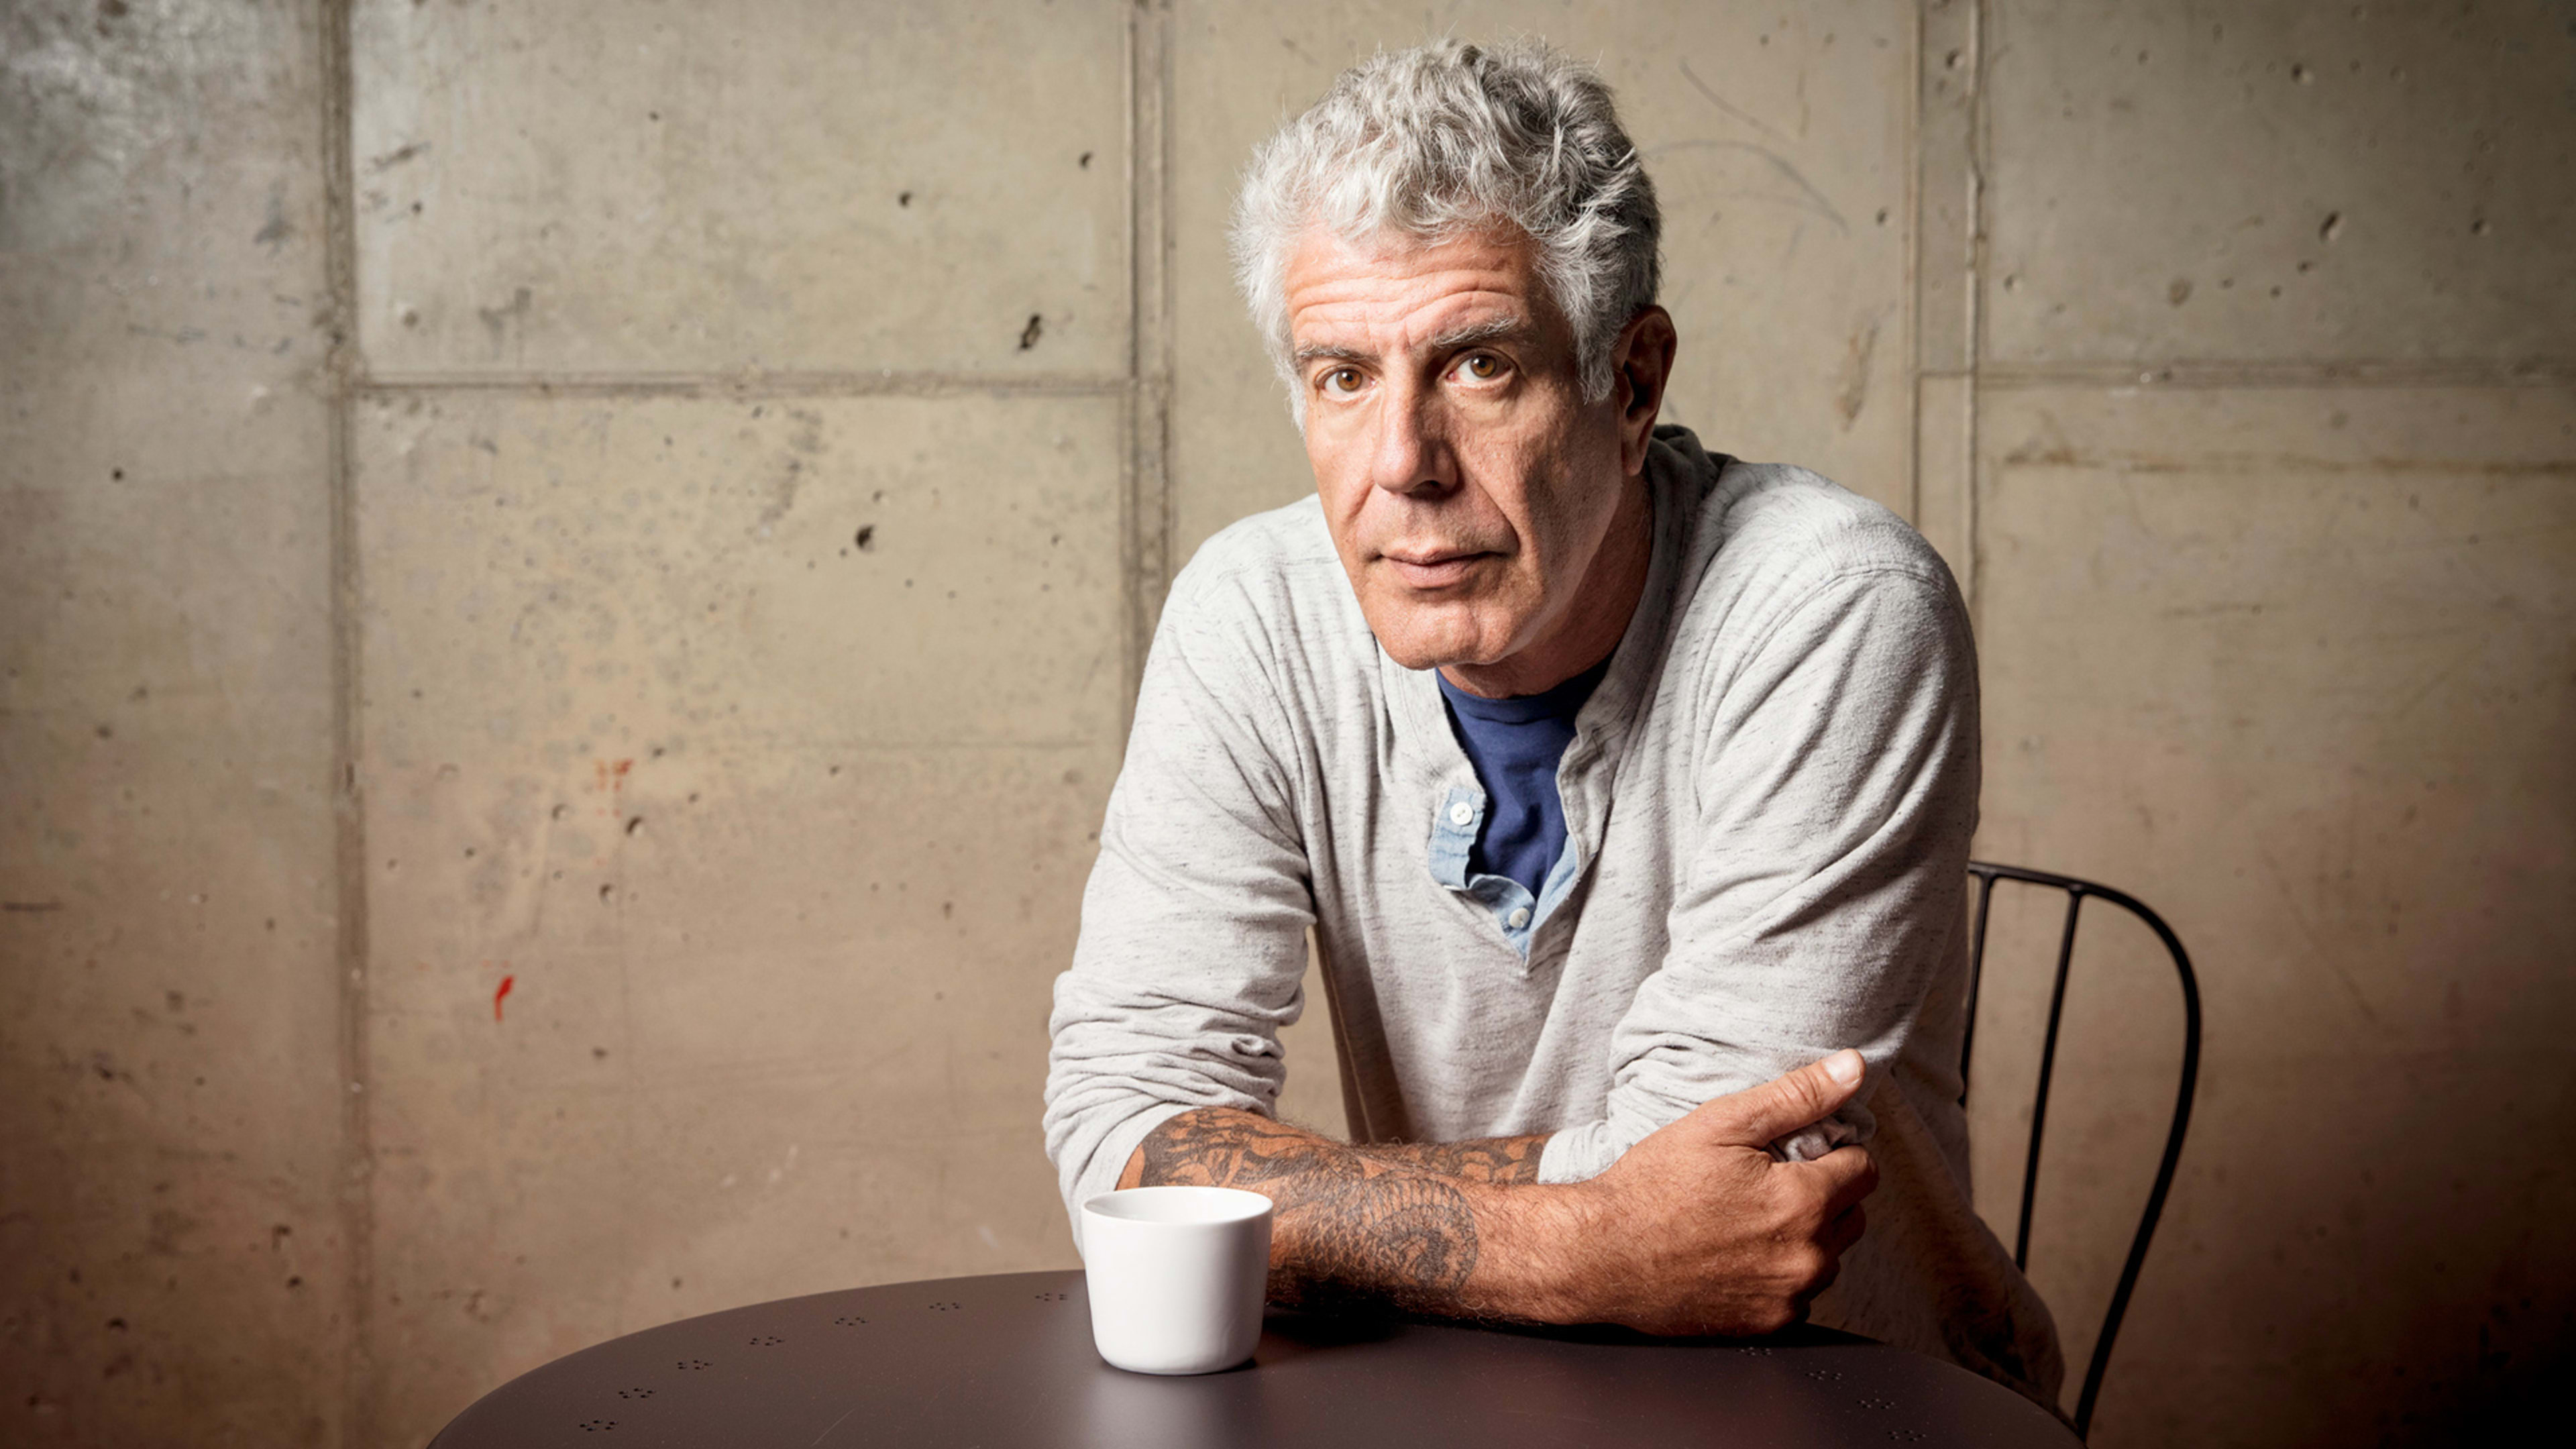 Anthony Bourdain Is Looking To Go “Deeper, Farther, Wider, And Smarter” With “Explore Parts Unknown”